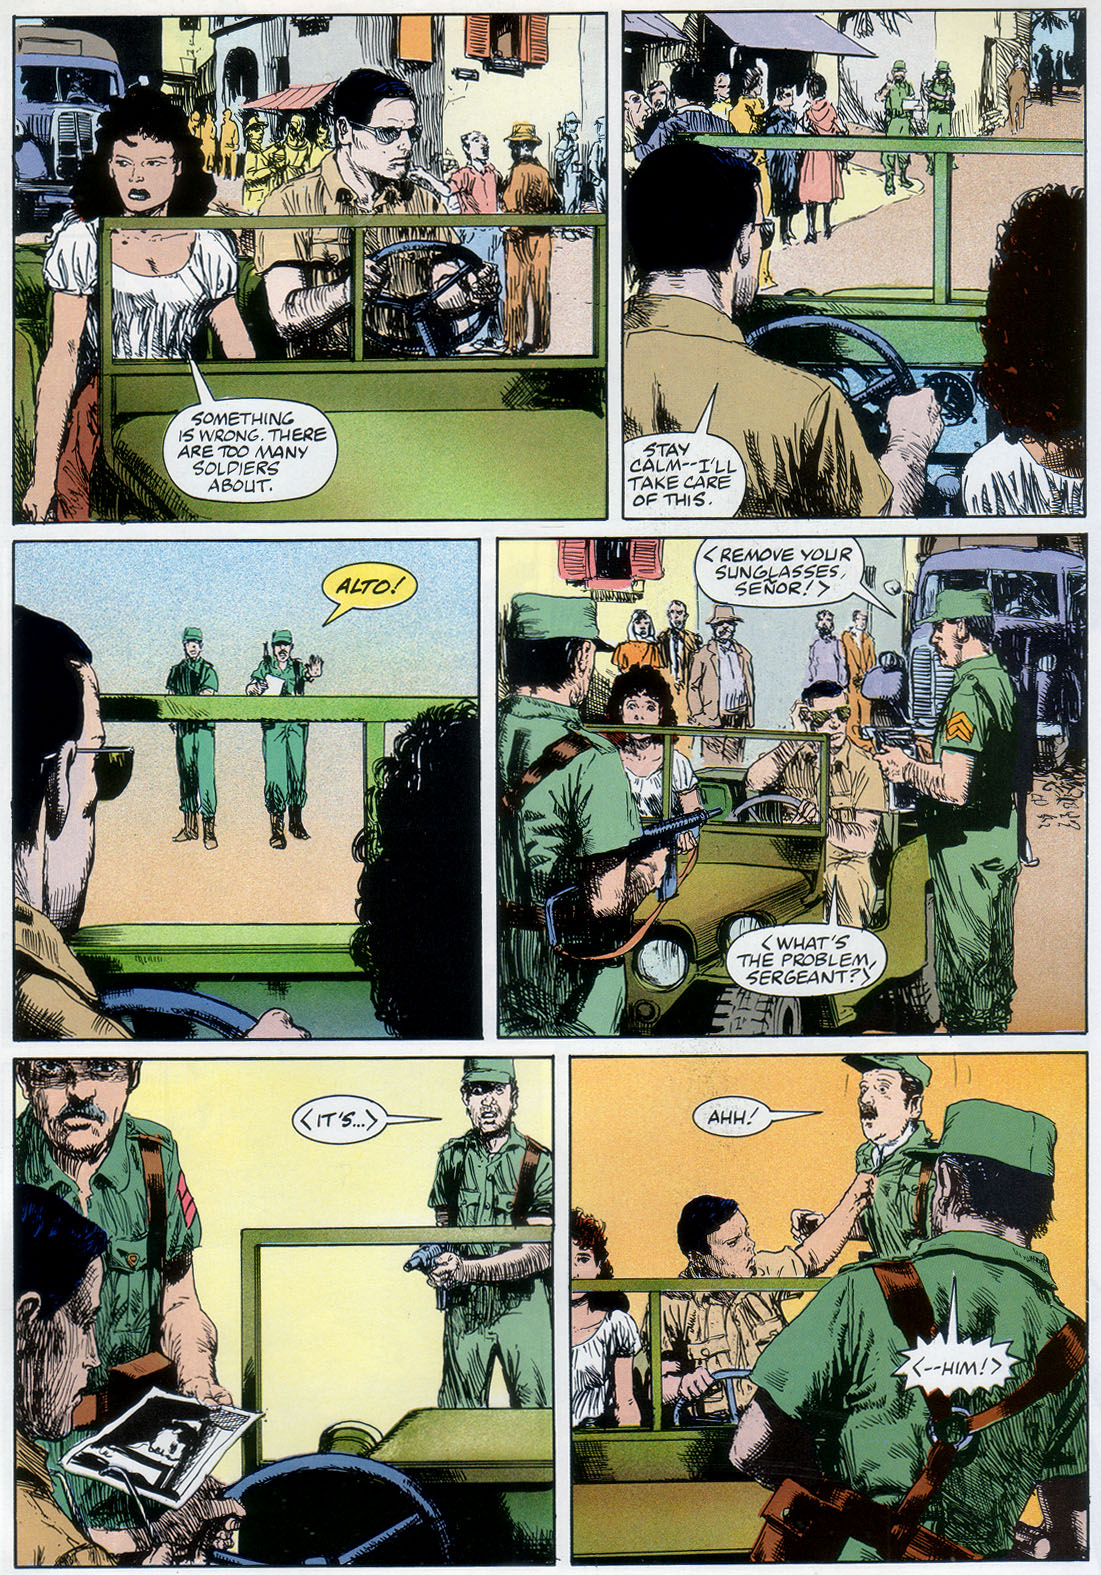 Marvel Graphic Novel issue 57 - Rick Mason - The Agent - Page 50